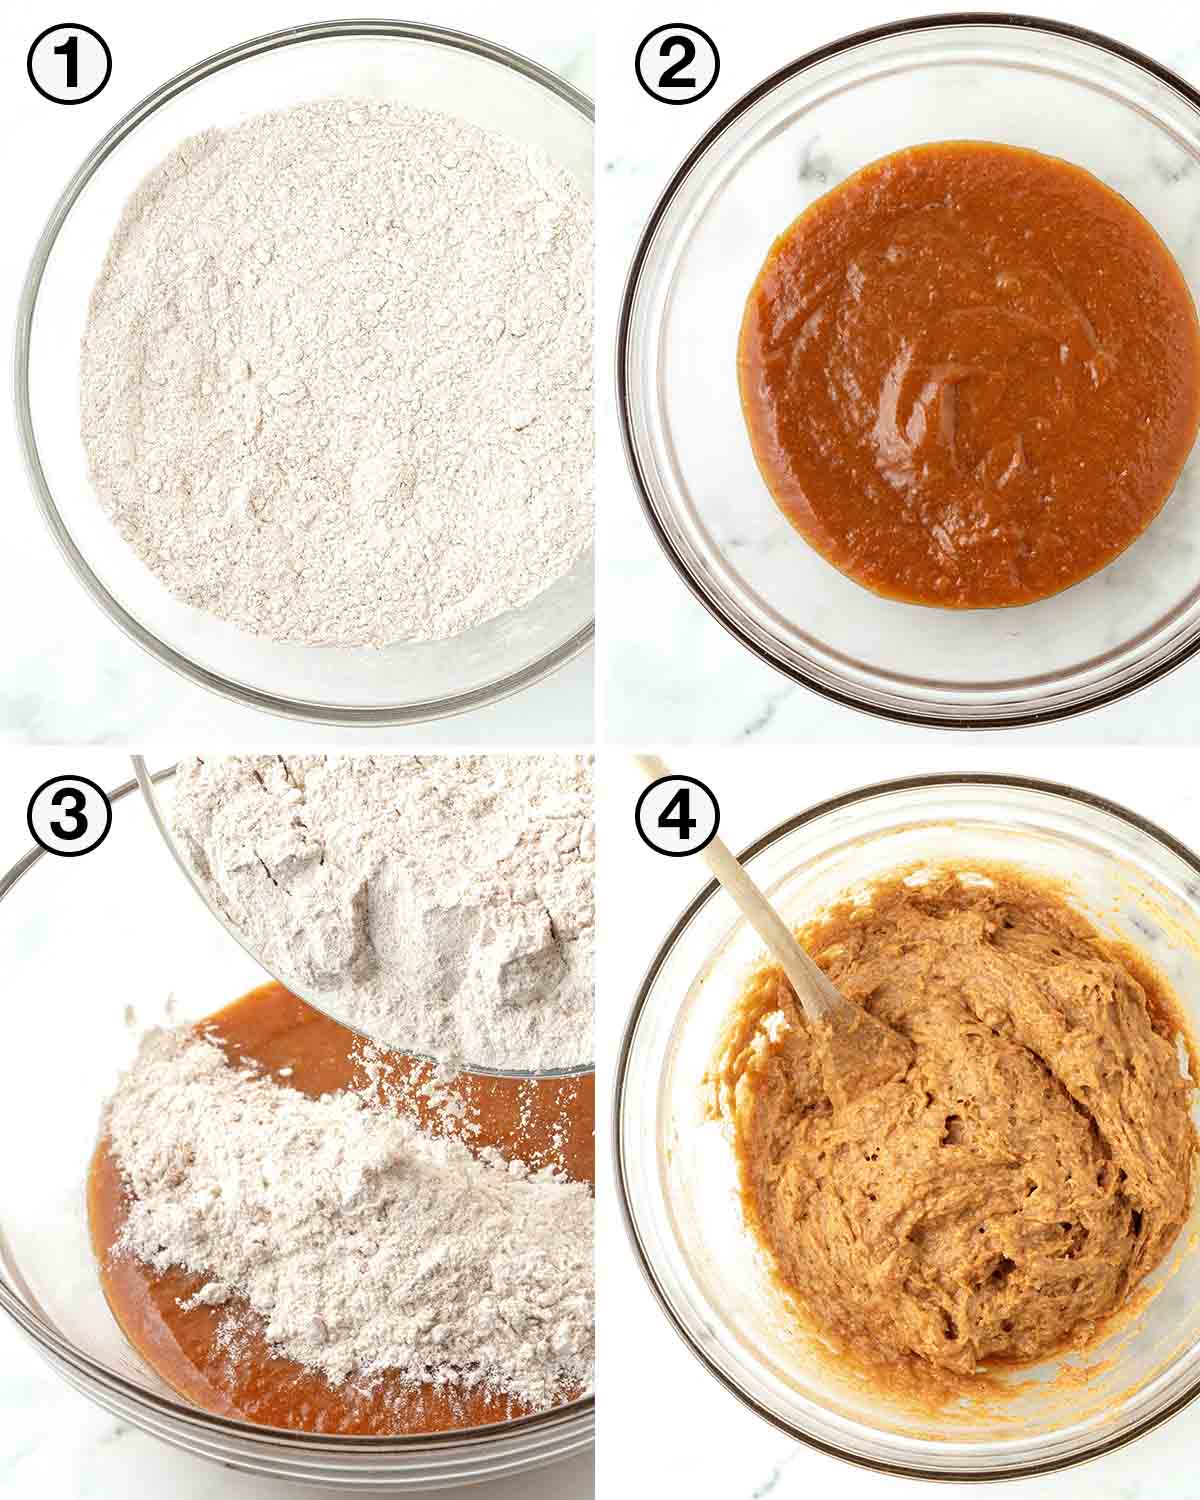 A collage of four images showing the first sequence of steps needed to make vegan pumpkin bars.